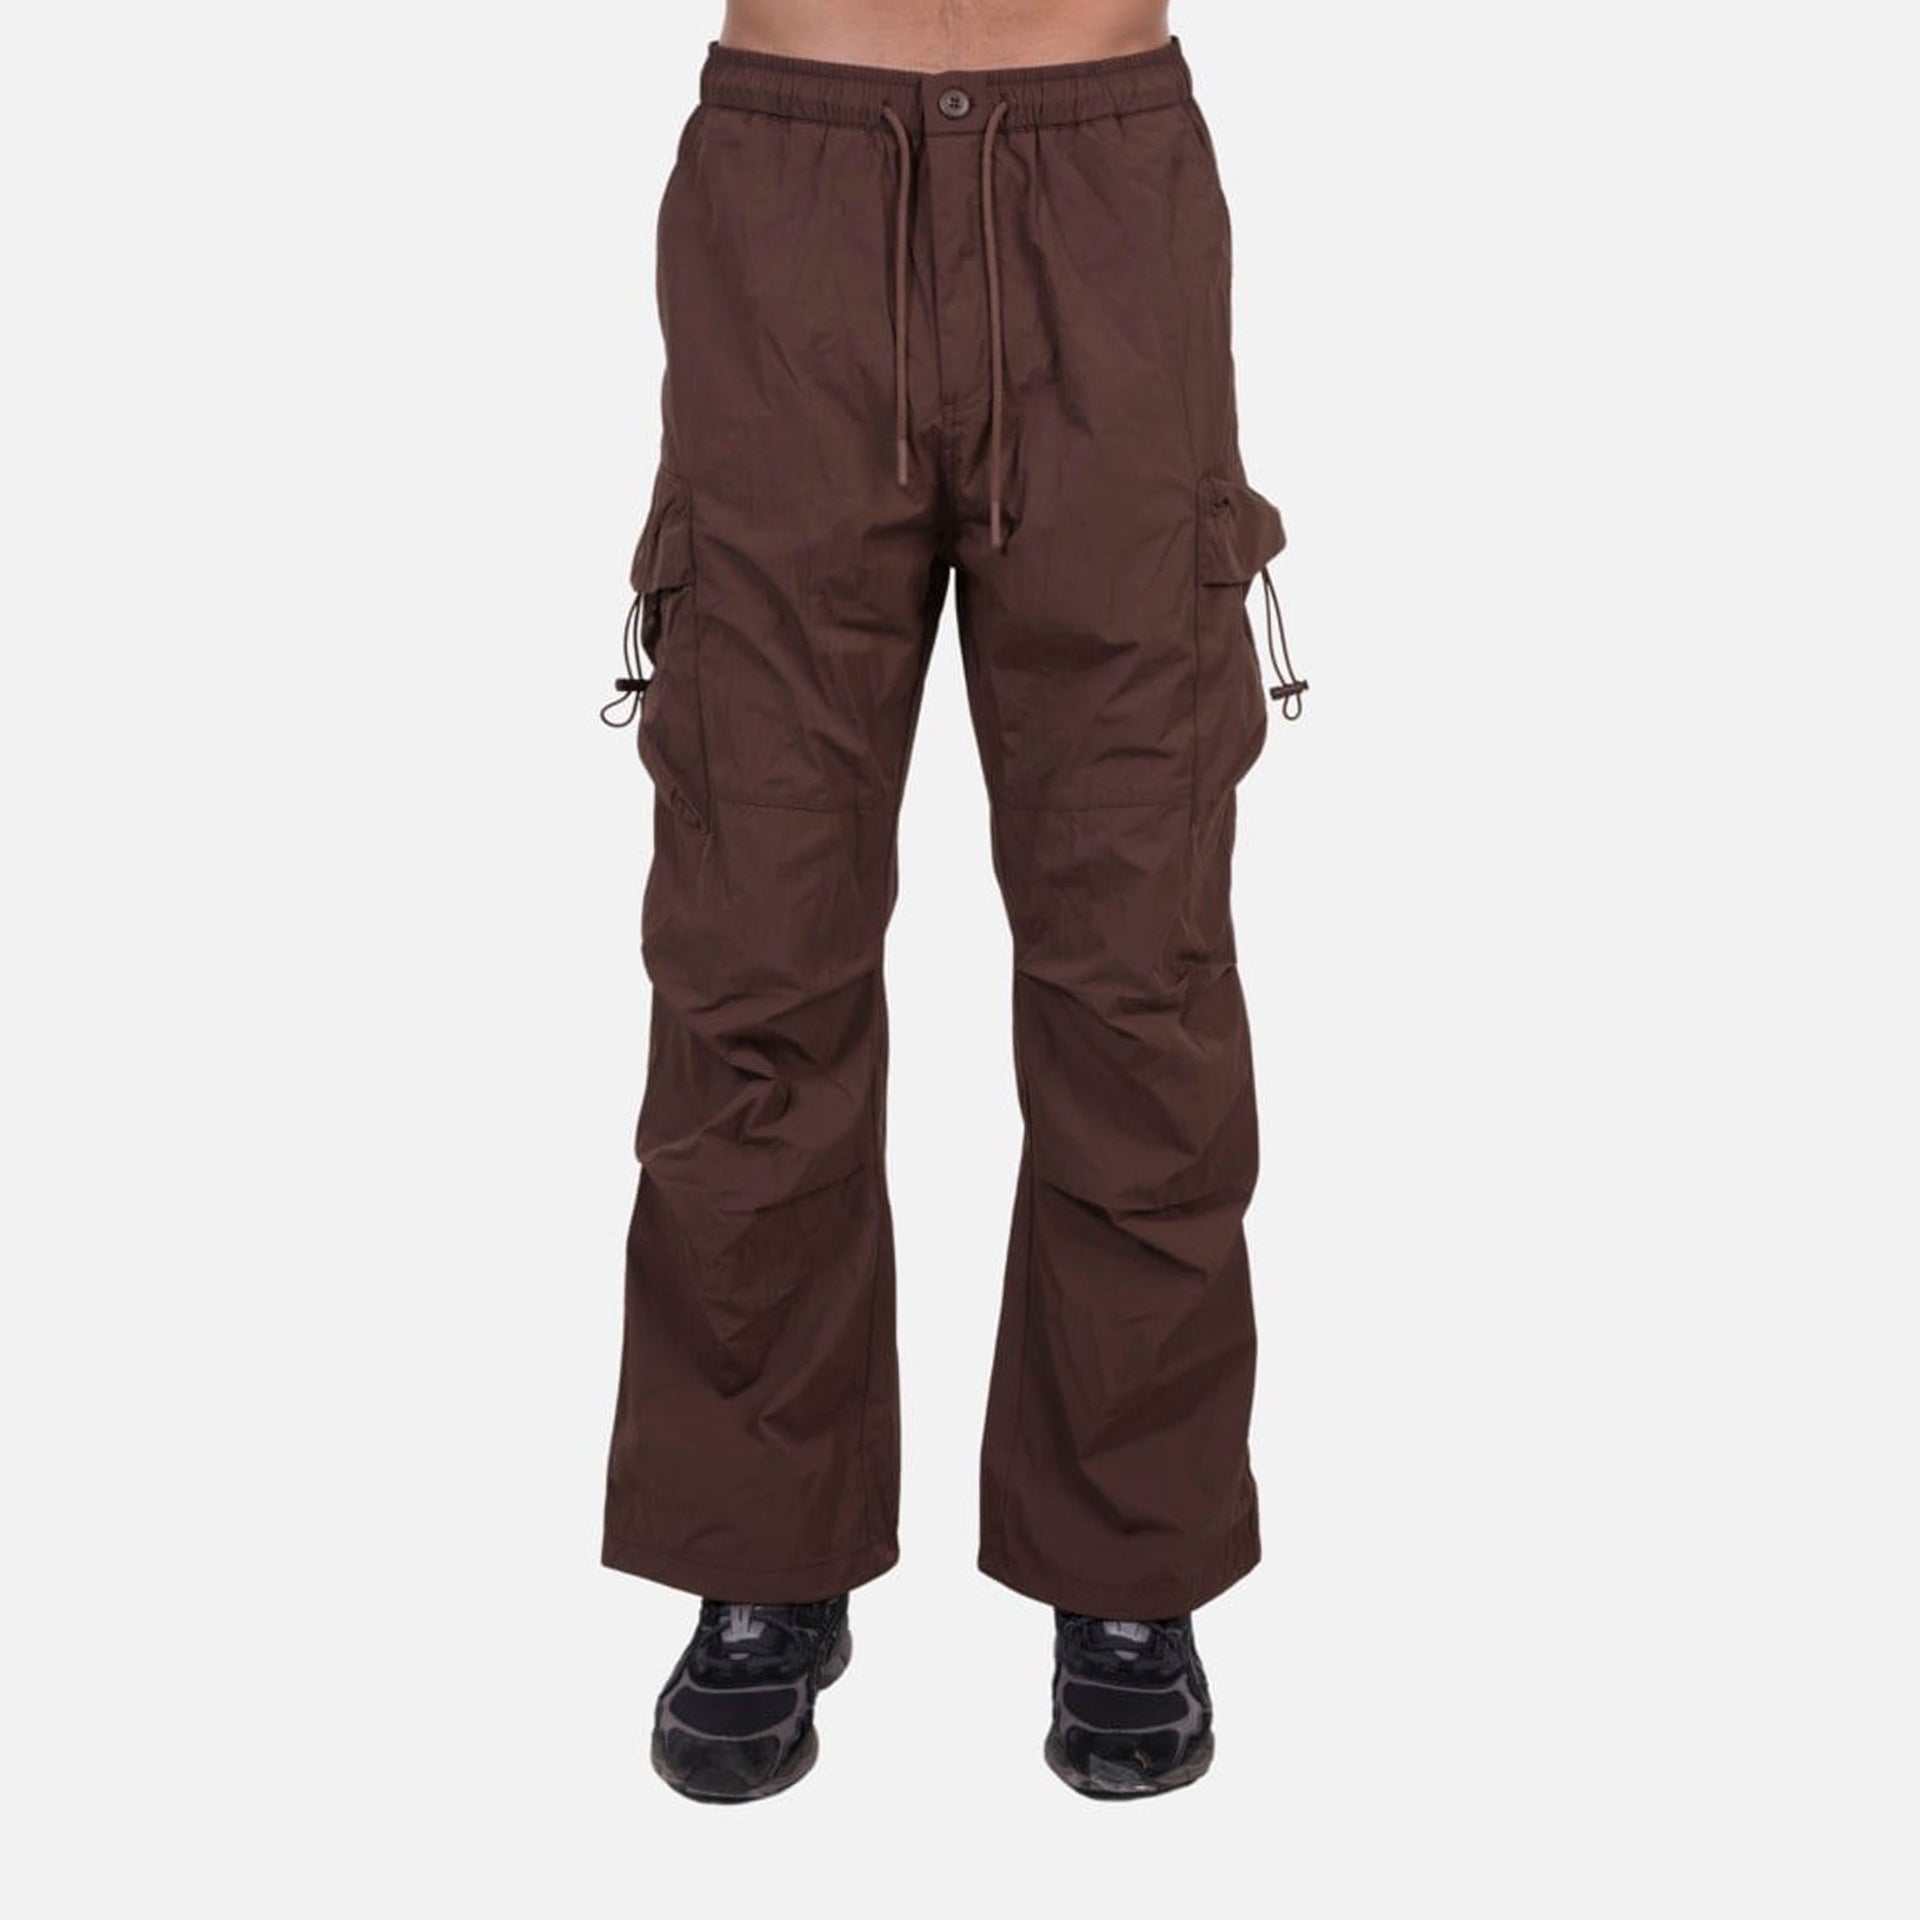 Brown Crinkled Pants With Pockets By Dracaena Cinnabari